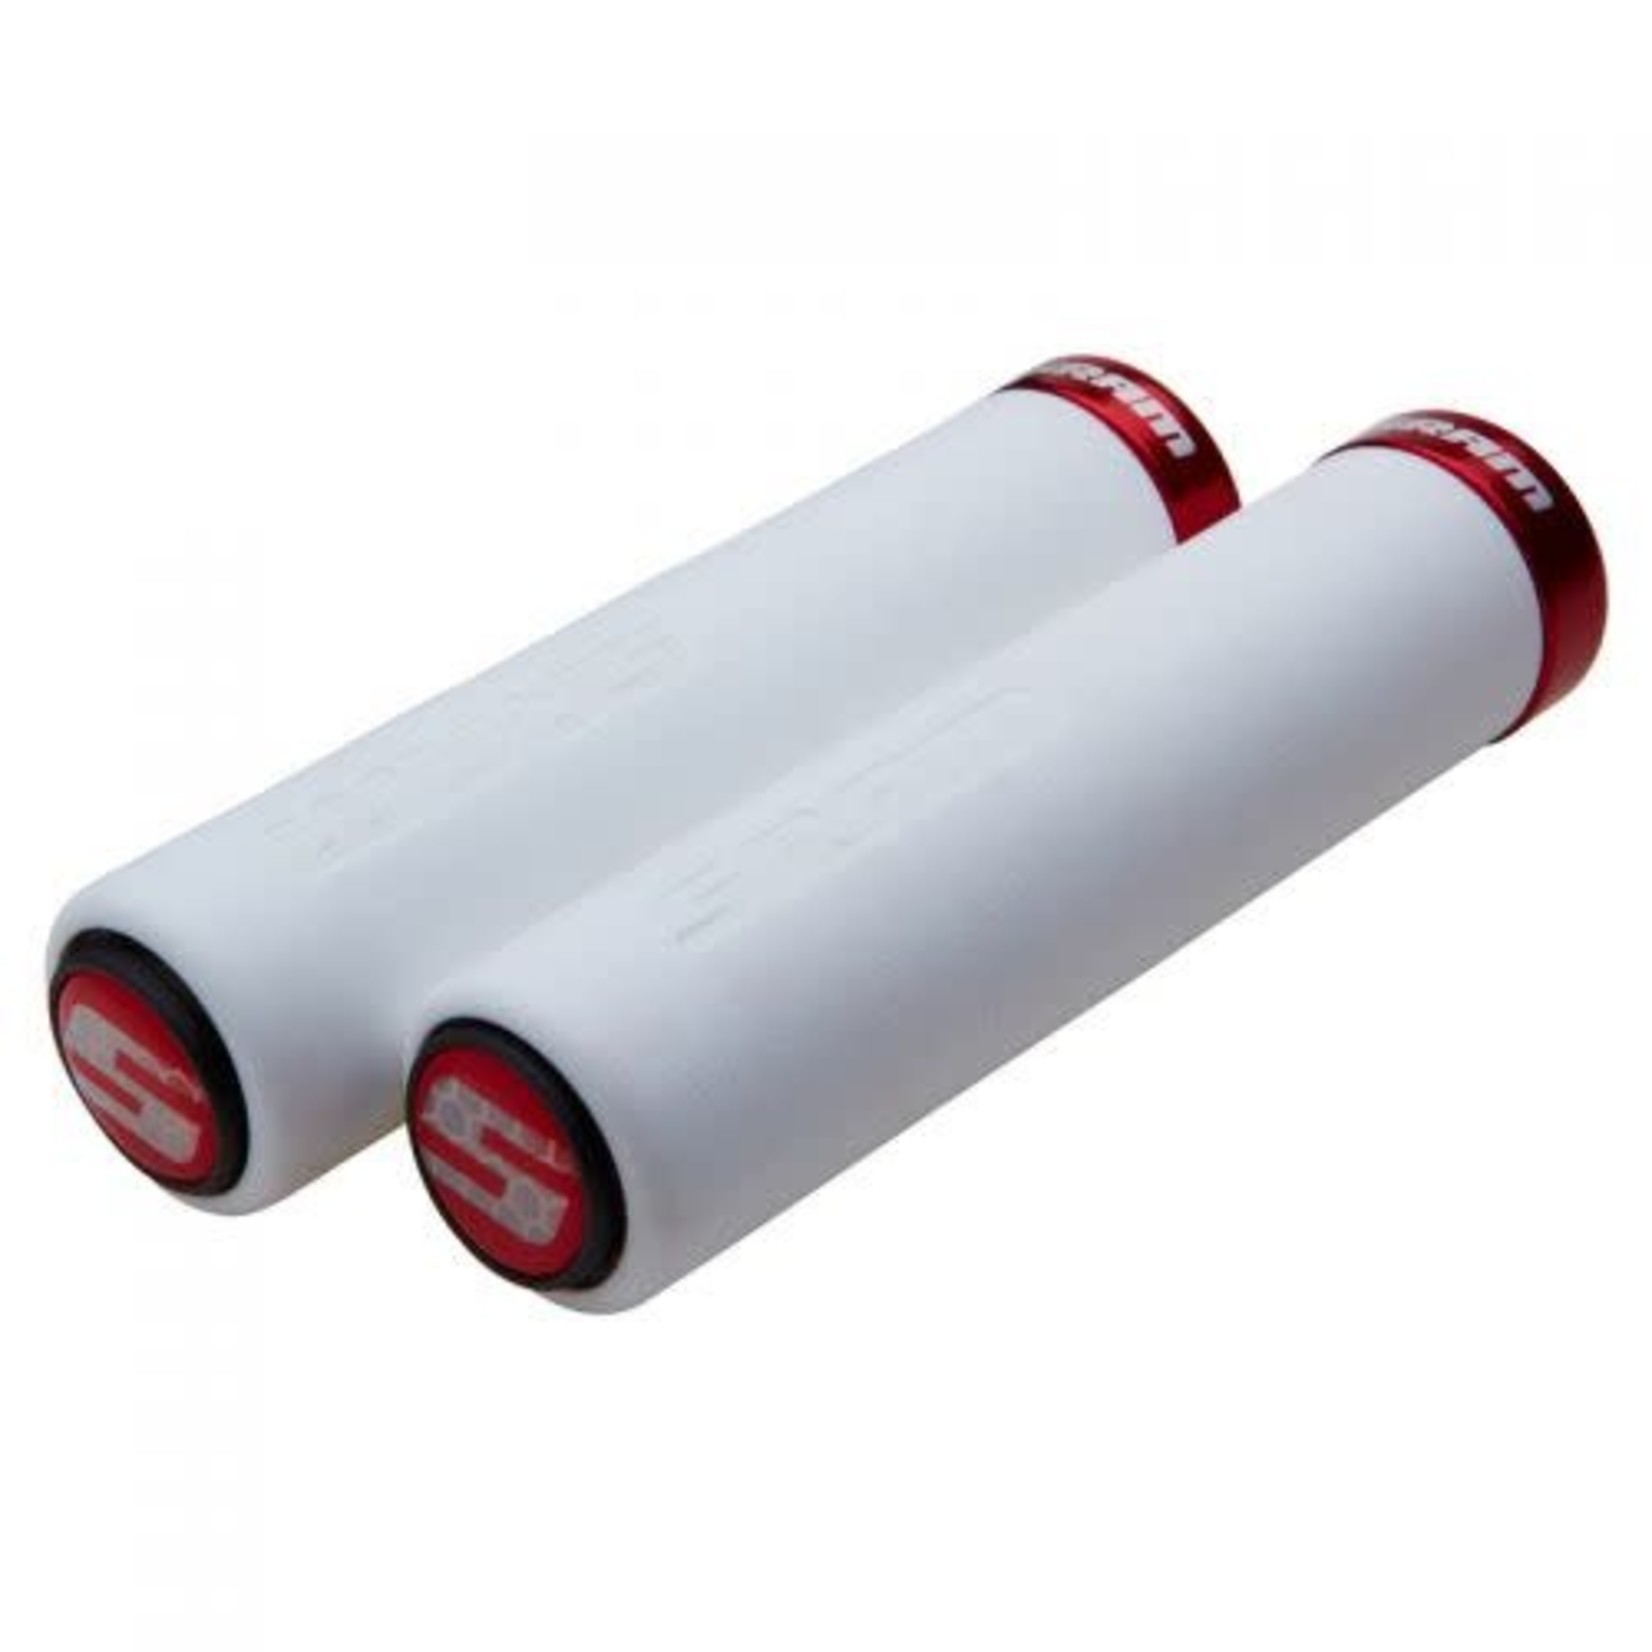 SRAM SRAM Locking Grips Foam 129mm White with Single Red Clamp and End Plugs